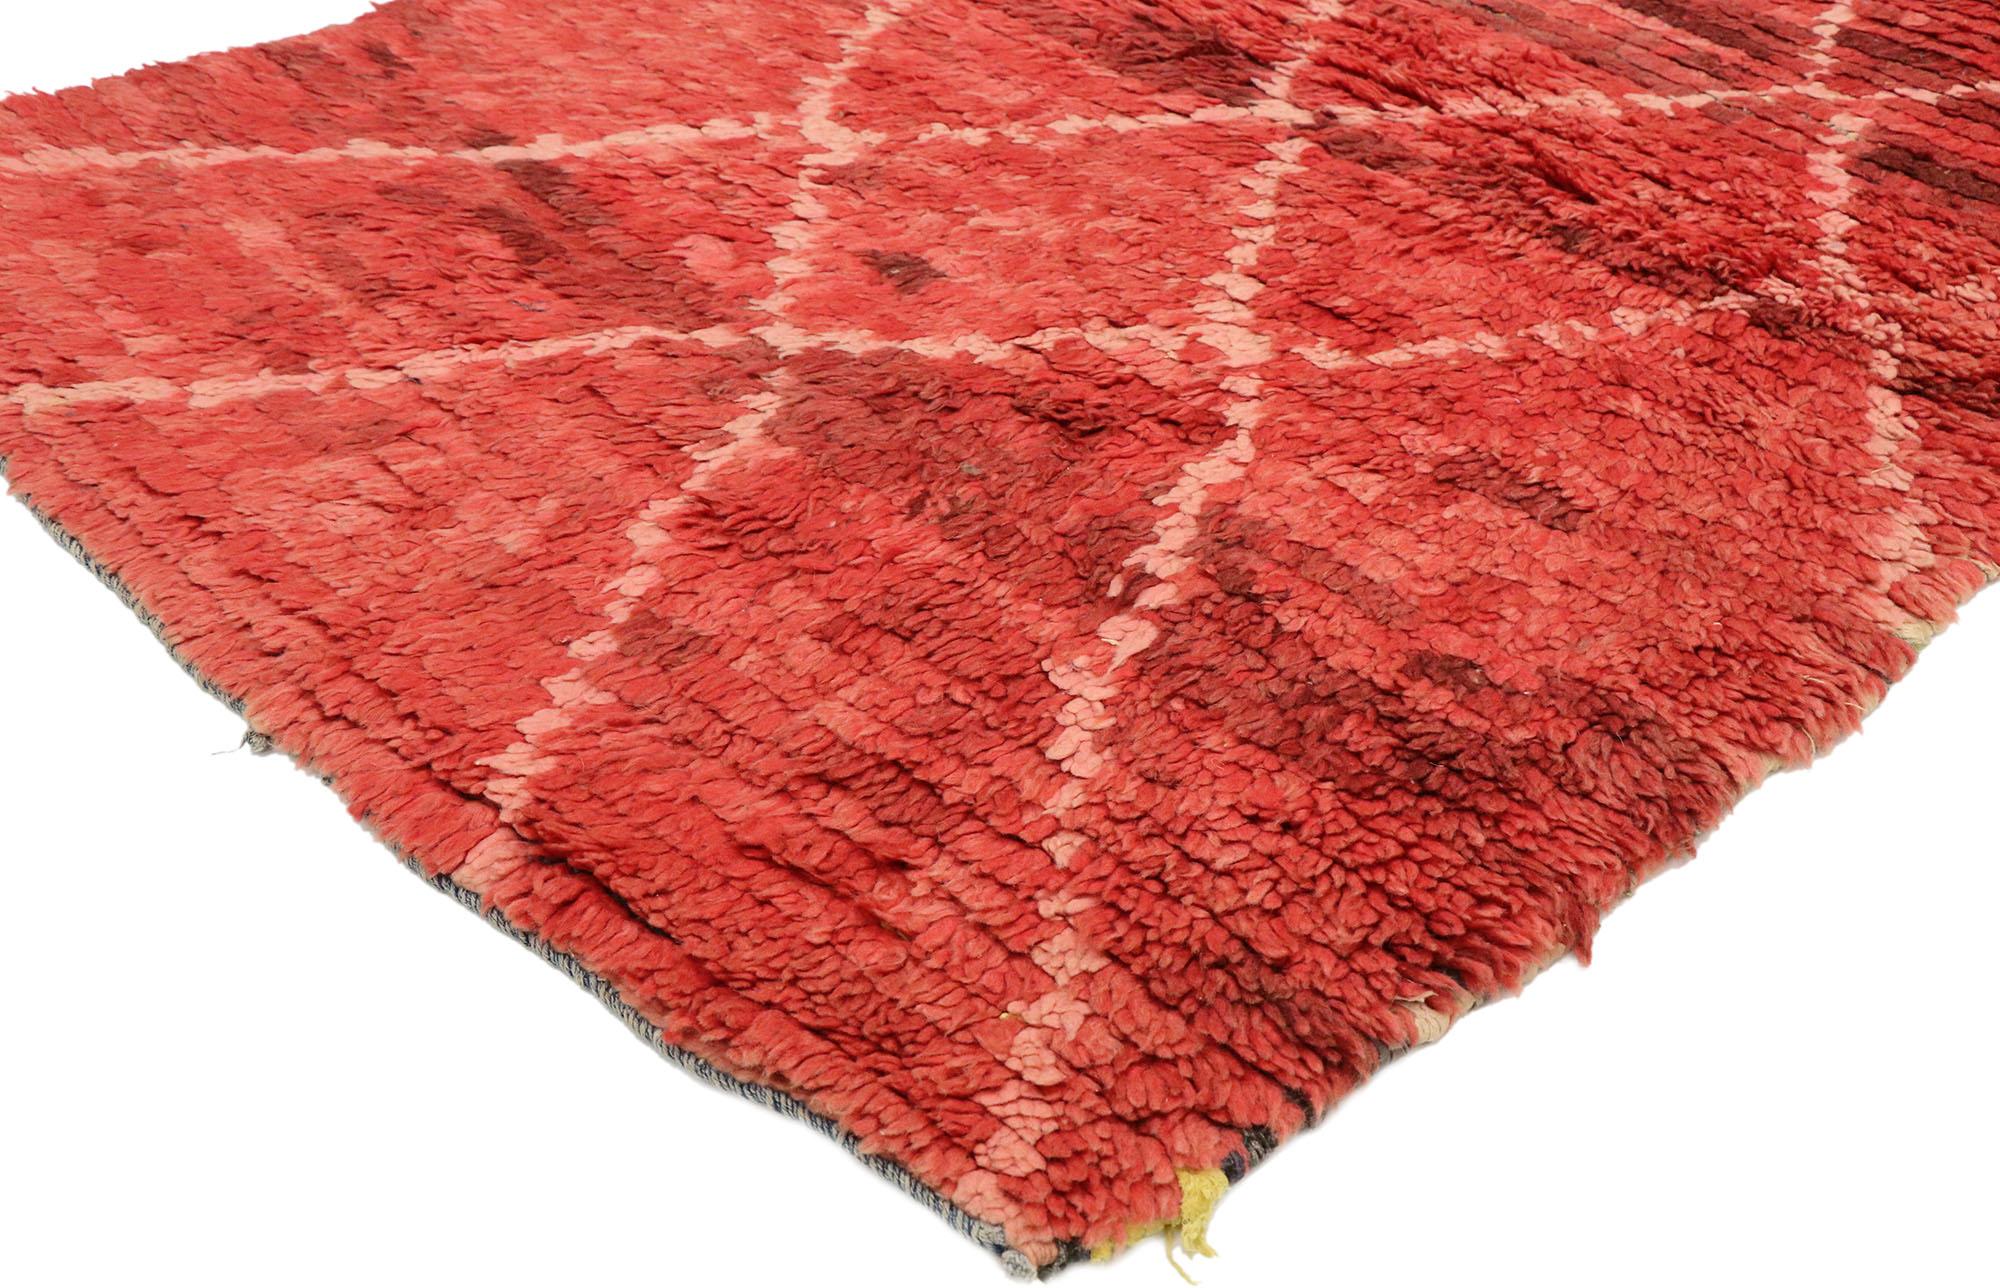 20614, vintage Berber Moroccan runner with tribal style. This hand knotted vintage Berber Moroccan runner stands out among other pieces. It is impossible for the eye to pass up the impassioned red that gives this piece life. Various hues of red,